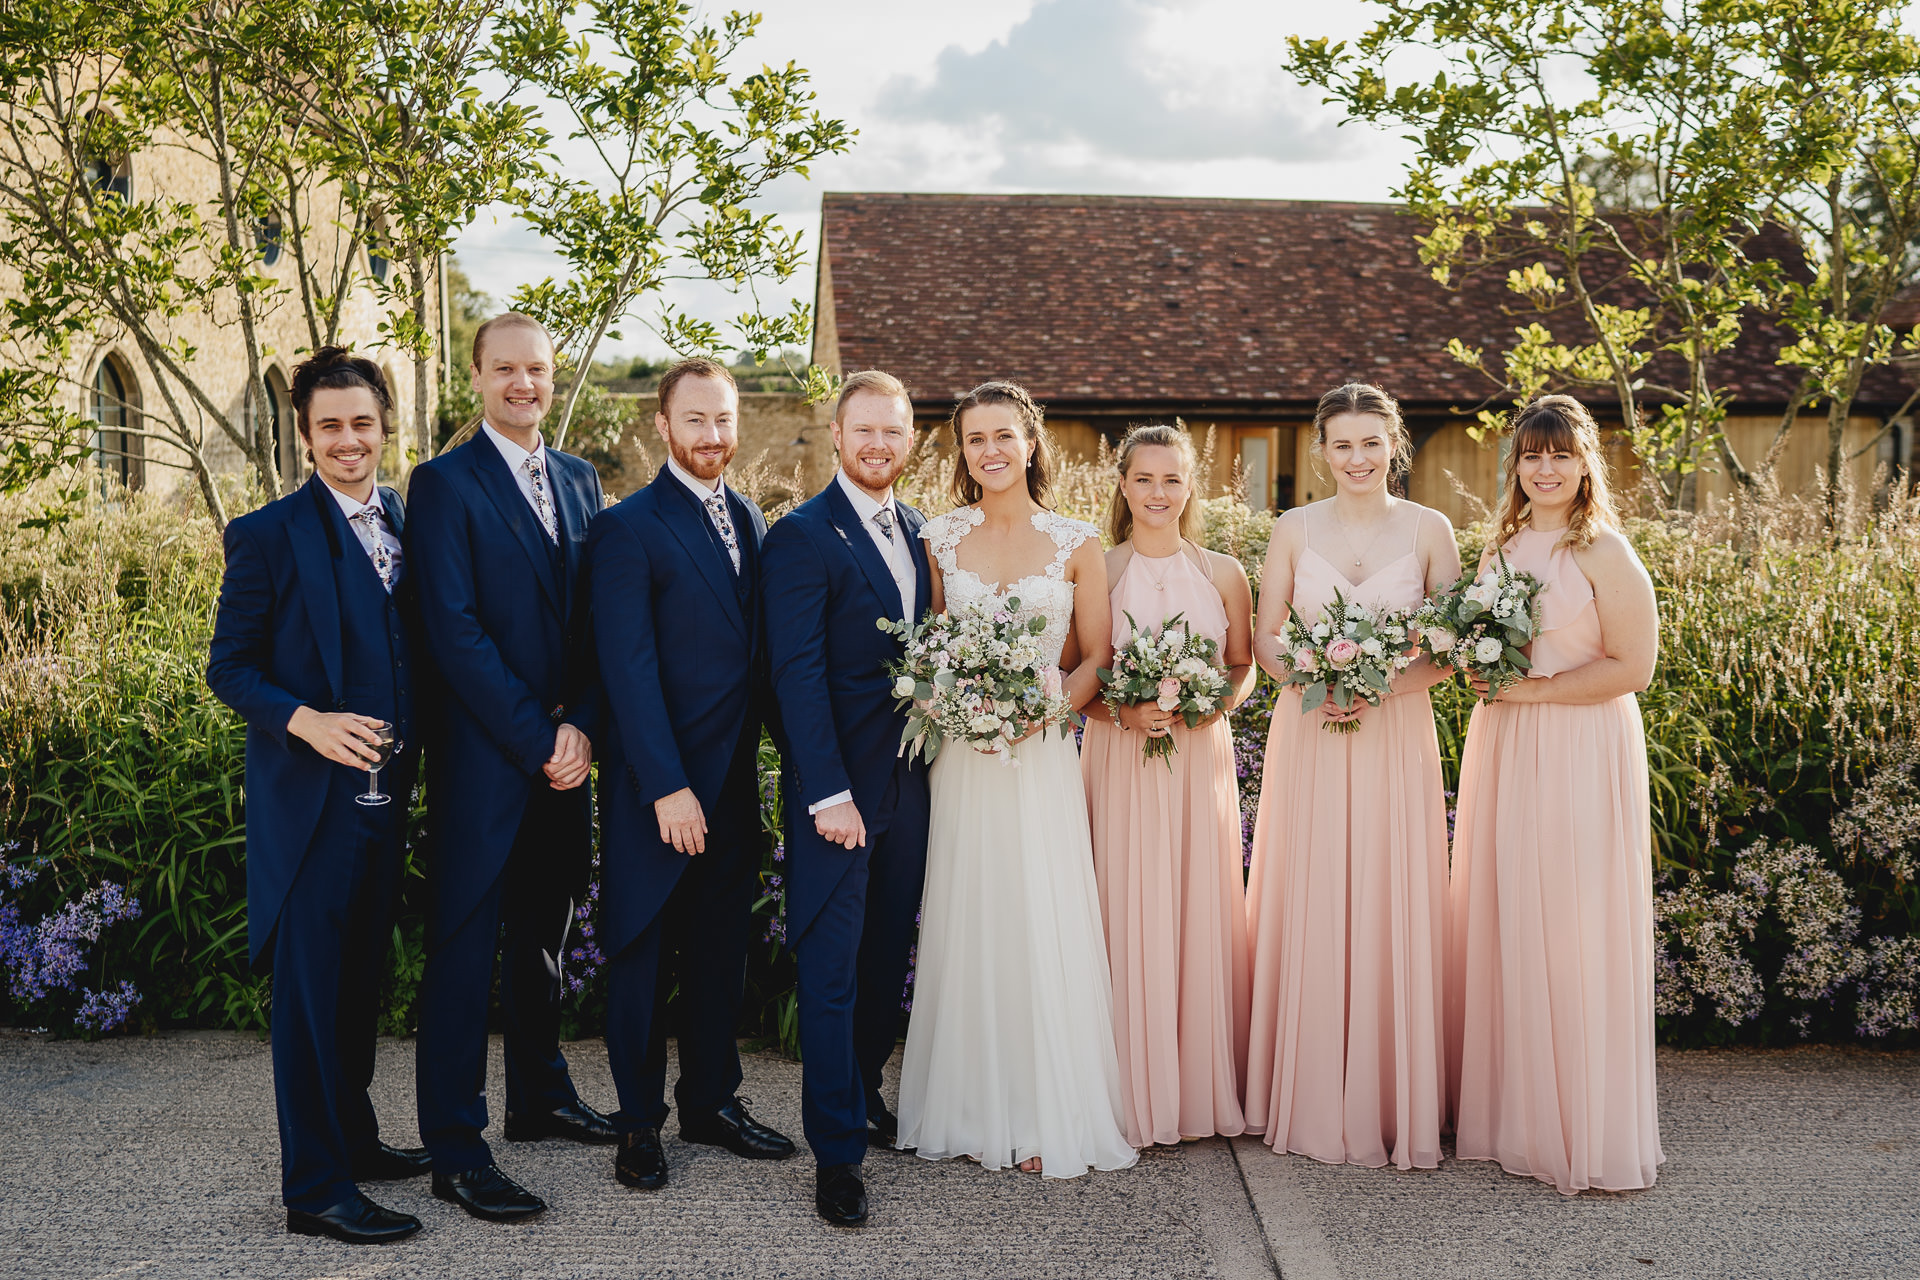 Group photo of bride and groom with wedding party at Hauser & Wirth Somerset